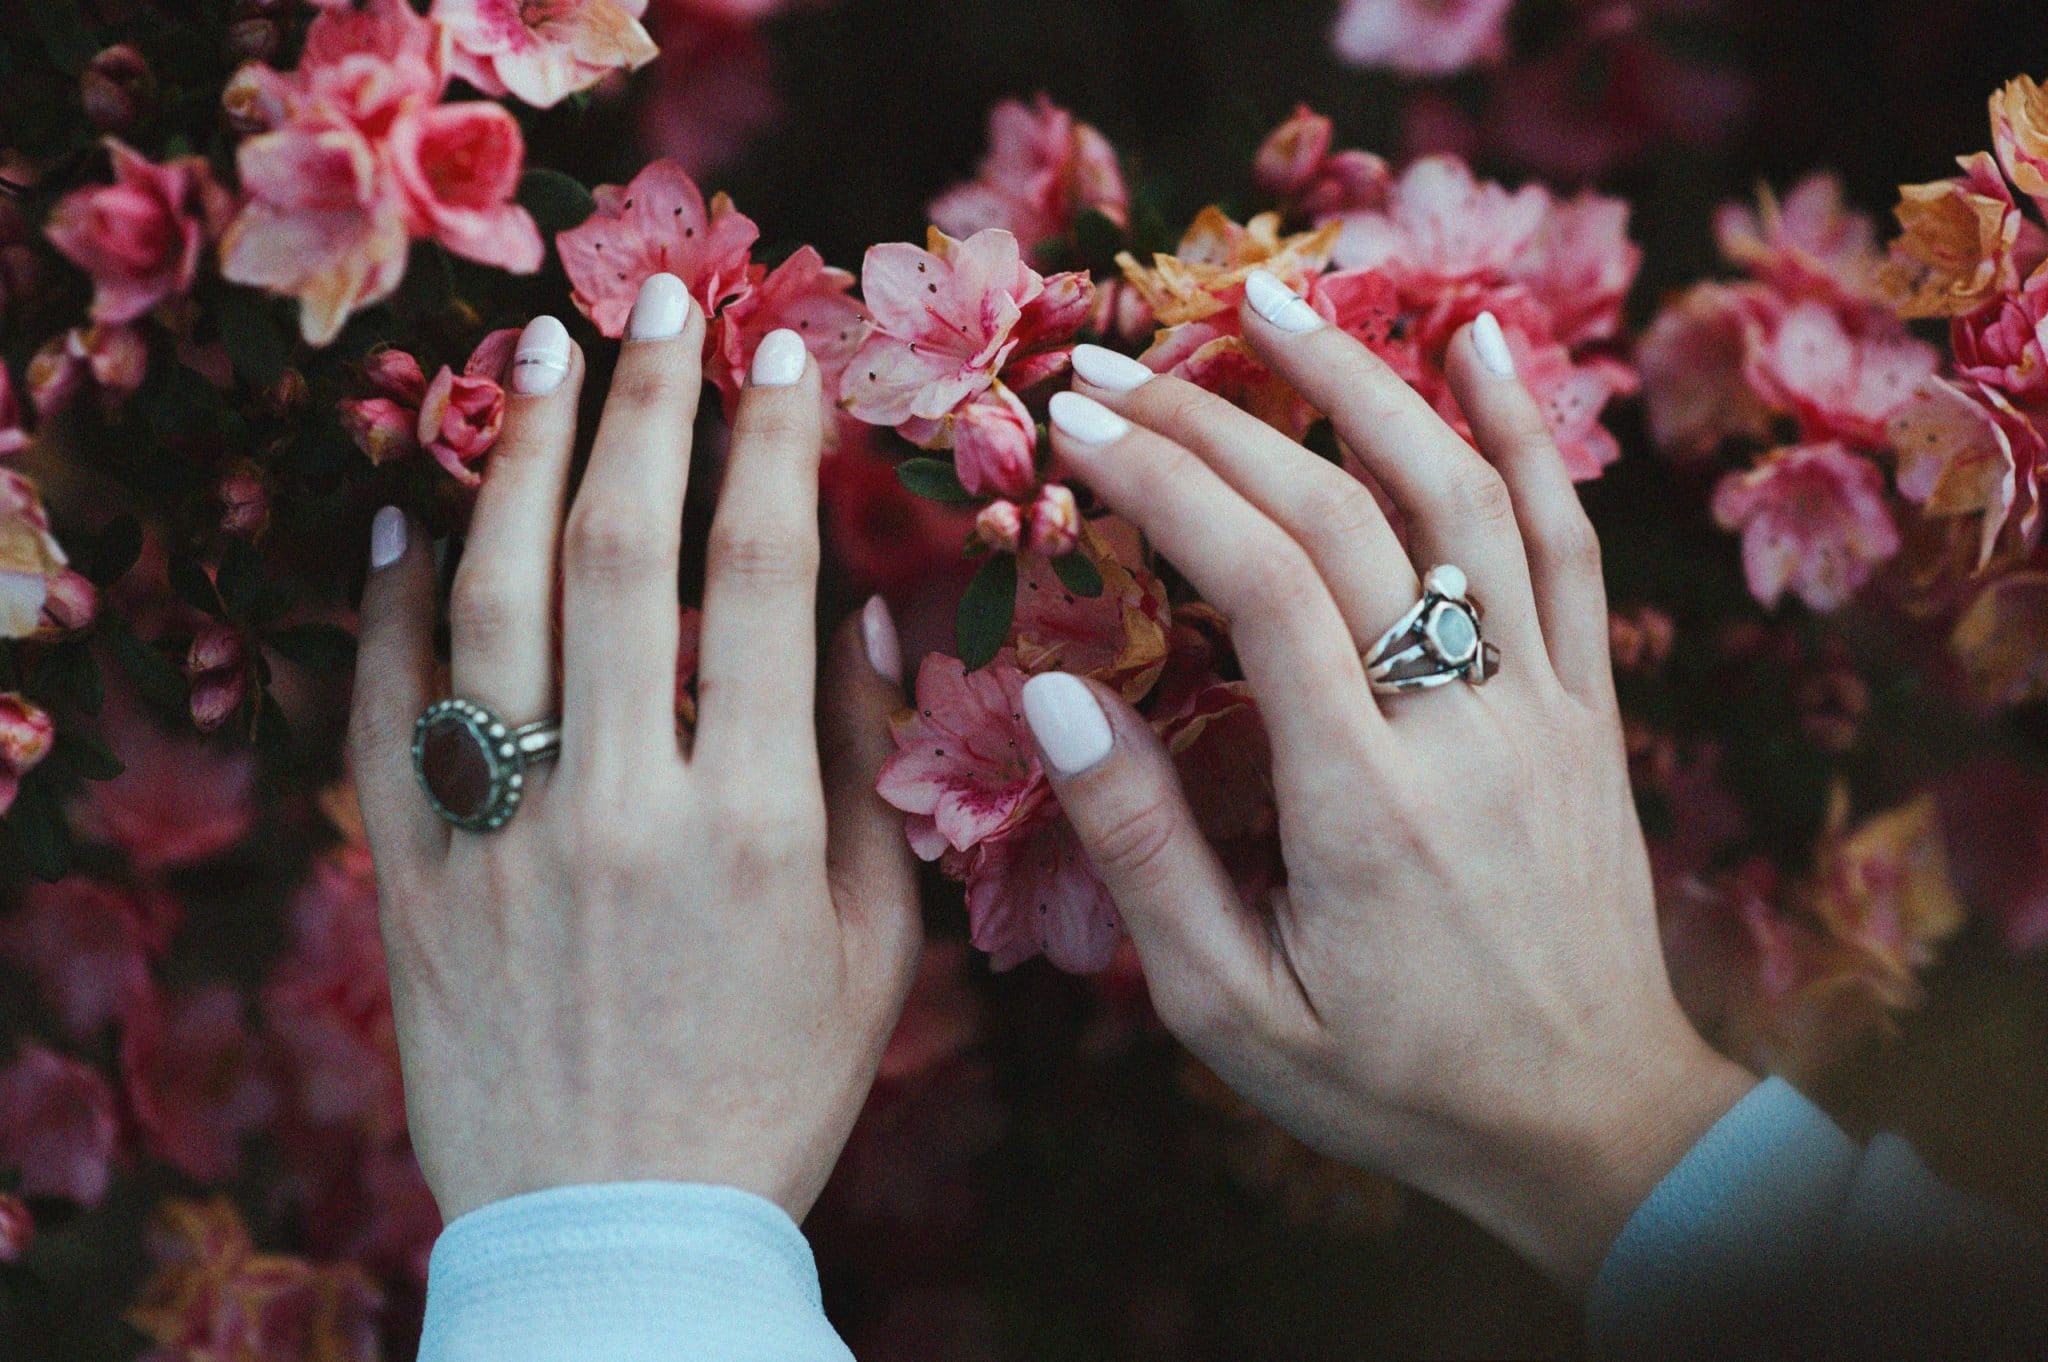 flowers and hands